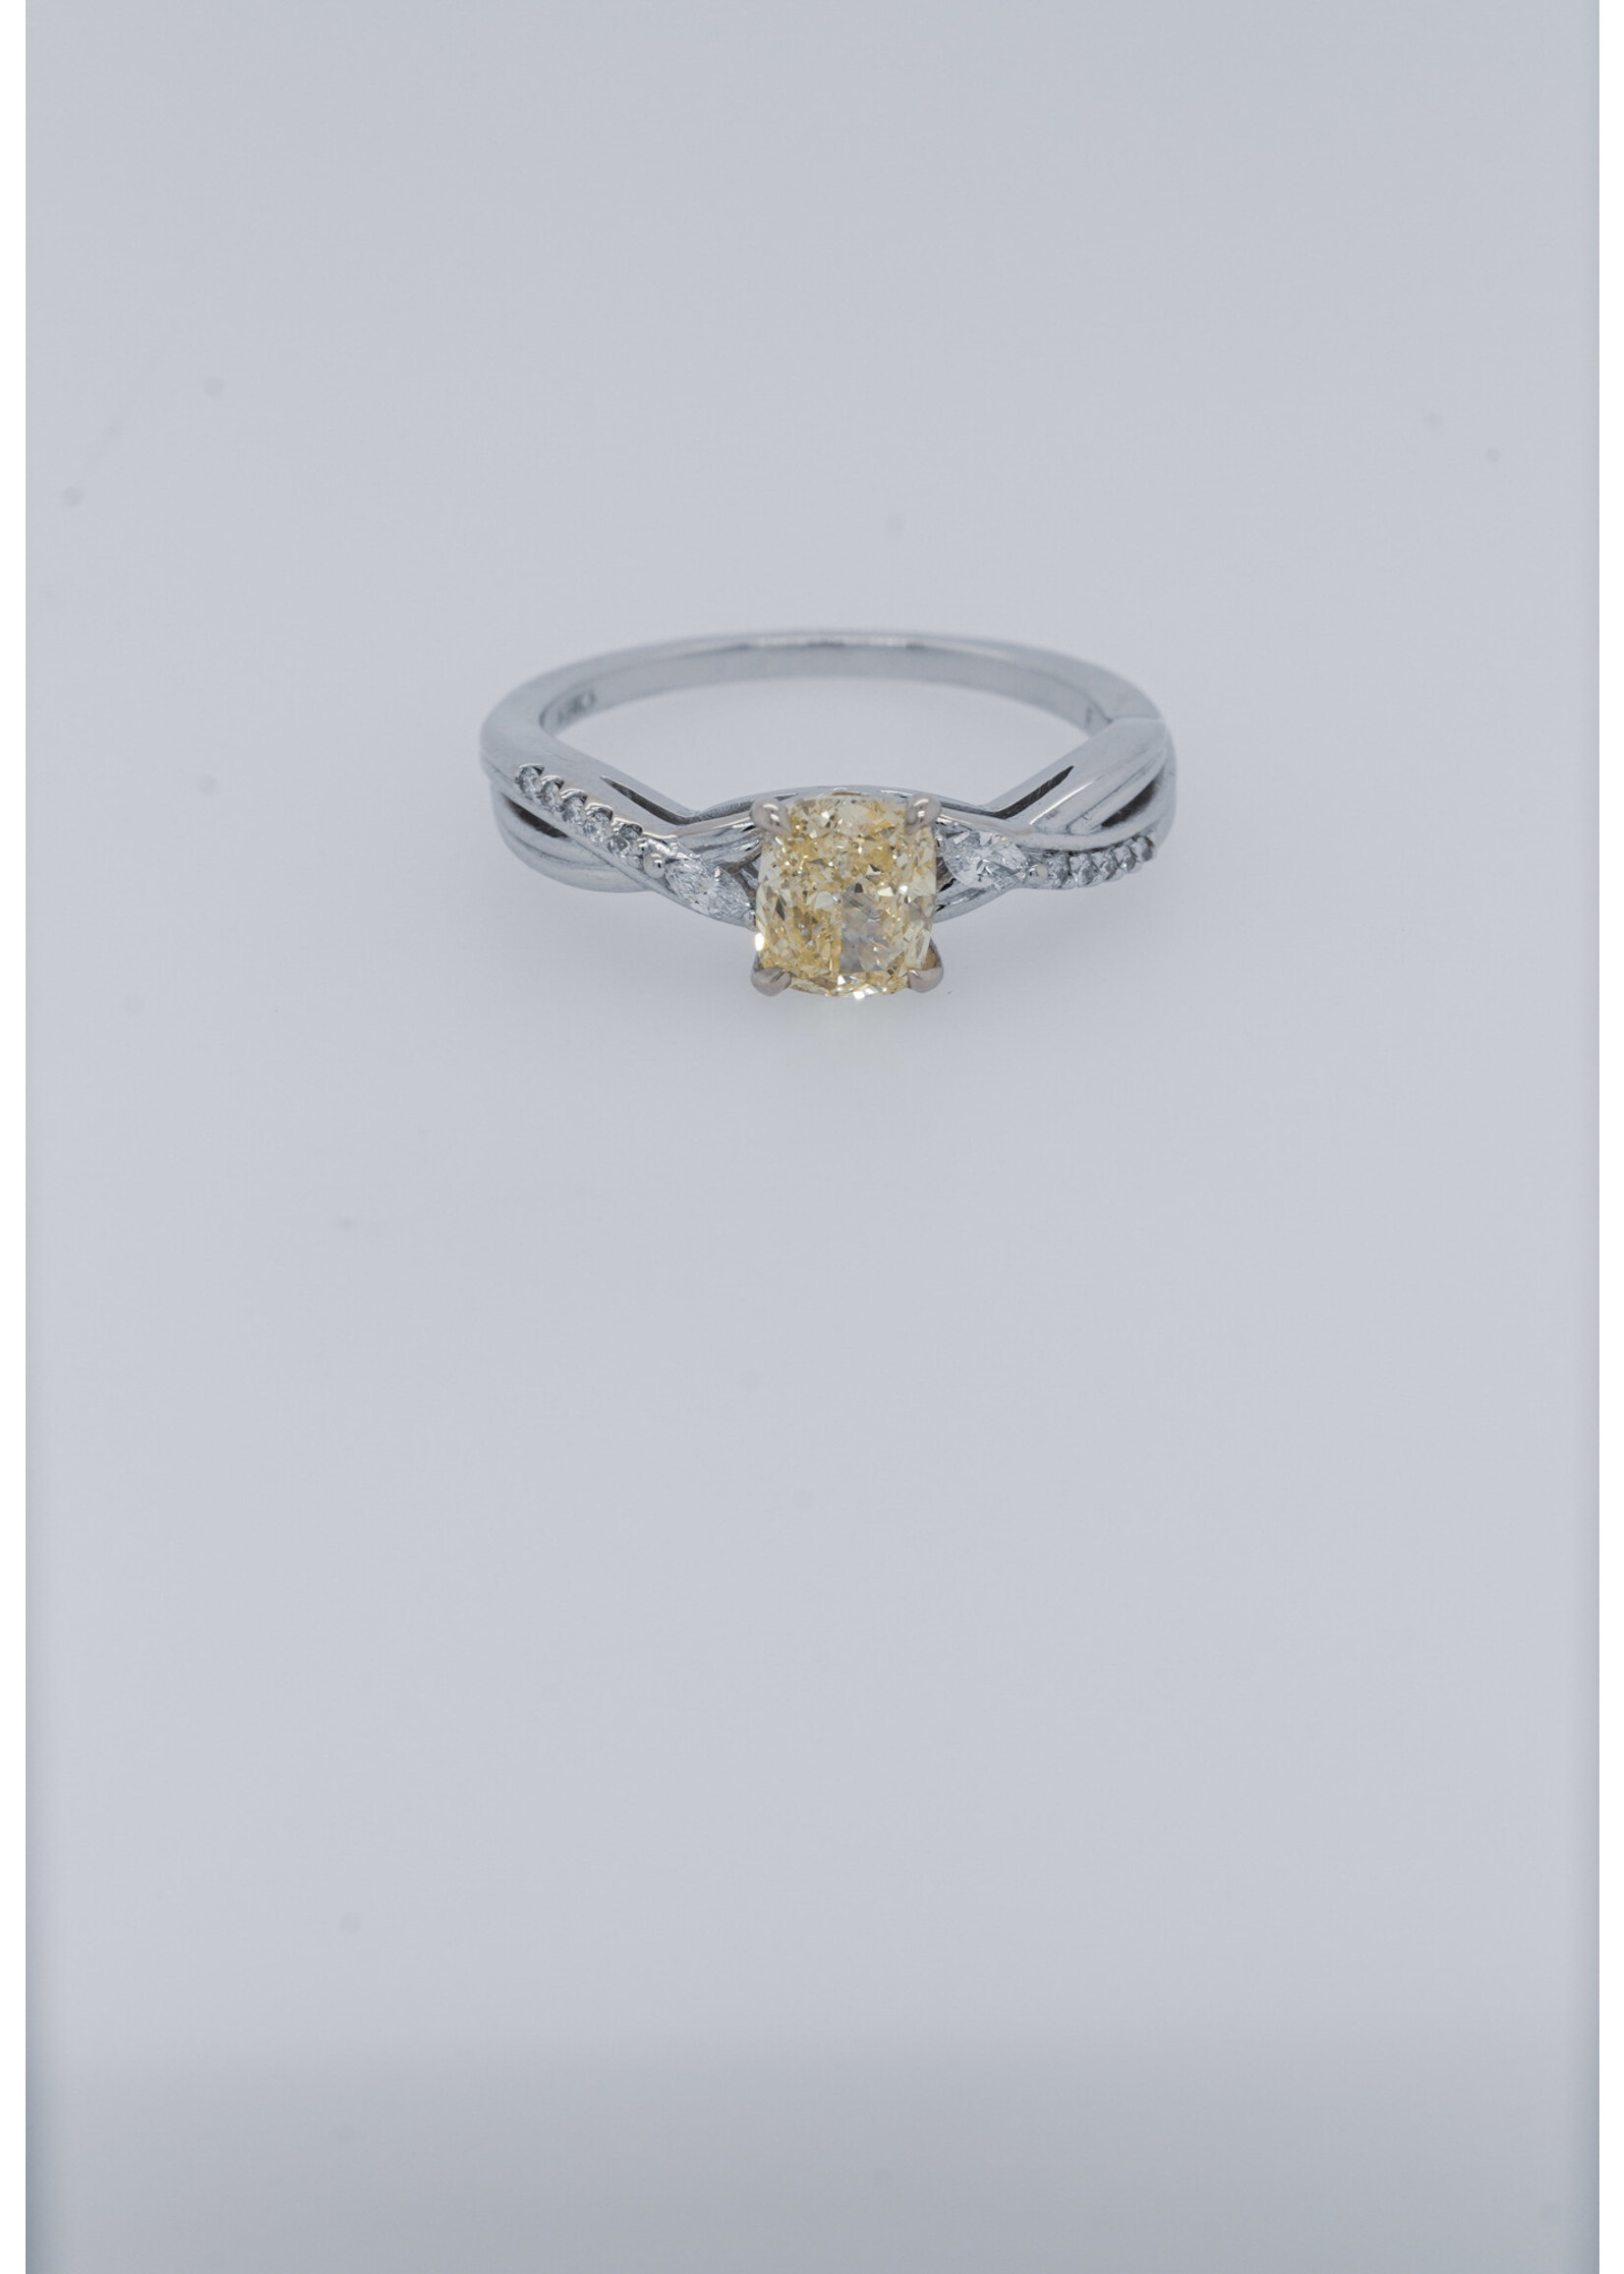 14KW 3.60g 1.19ctw (1.01ctr) FLY/SI1 Cushion Diamond Engagement Ring (size 7.25)